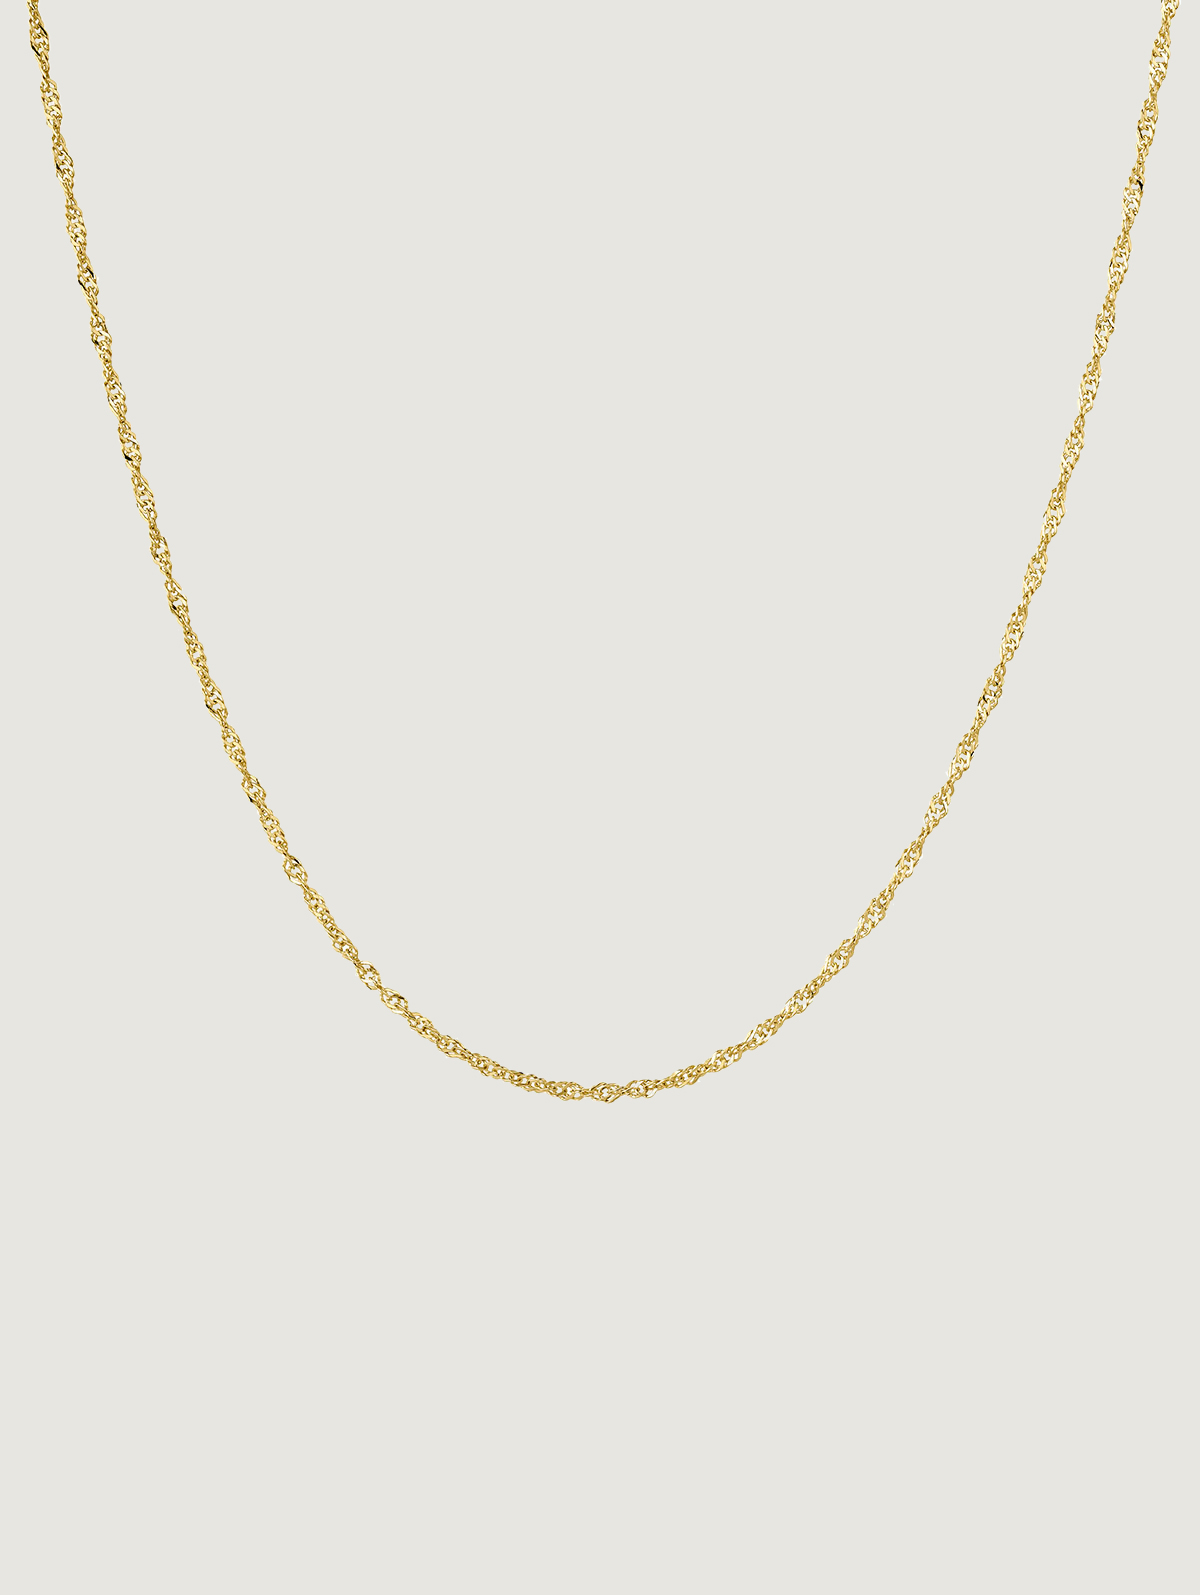 Fine link chain of 9K yellow gold rat tail